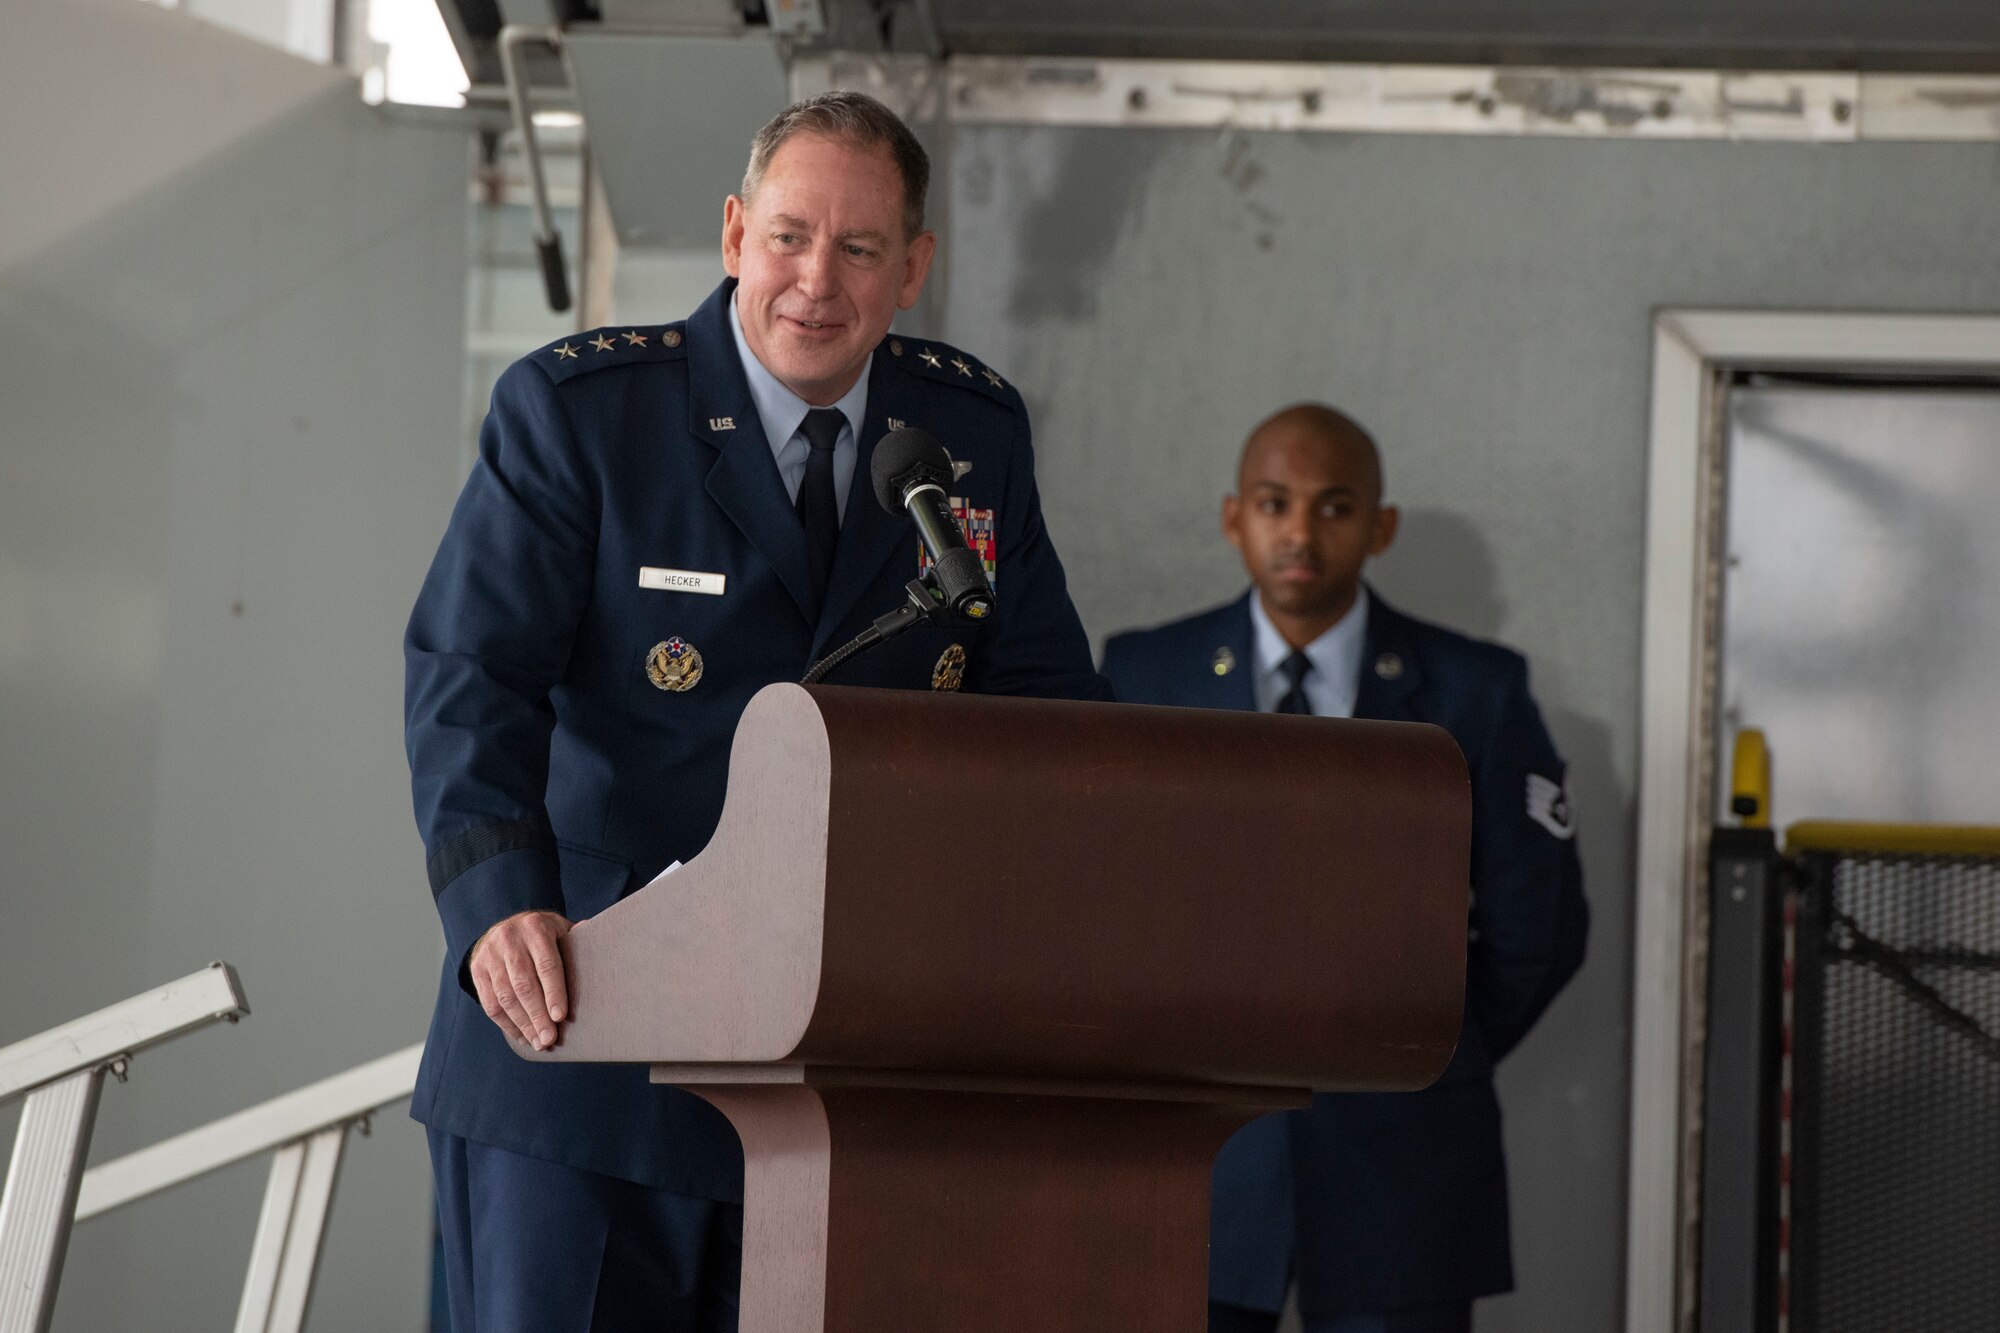 Lt. Gen. James Hecker, Air University commander and president, speaks during Maxwell Air Force Base's Veteran's Day ceremony Nov. 11, 2020. (U.S. Air Force photo by Senior Airman Charles Welty)